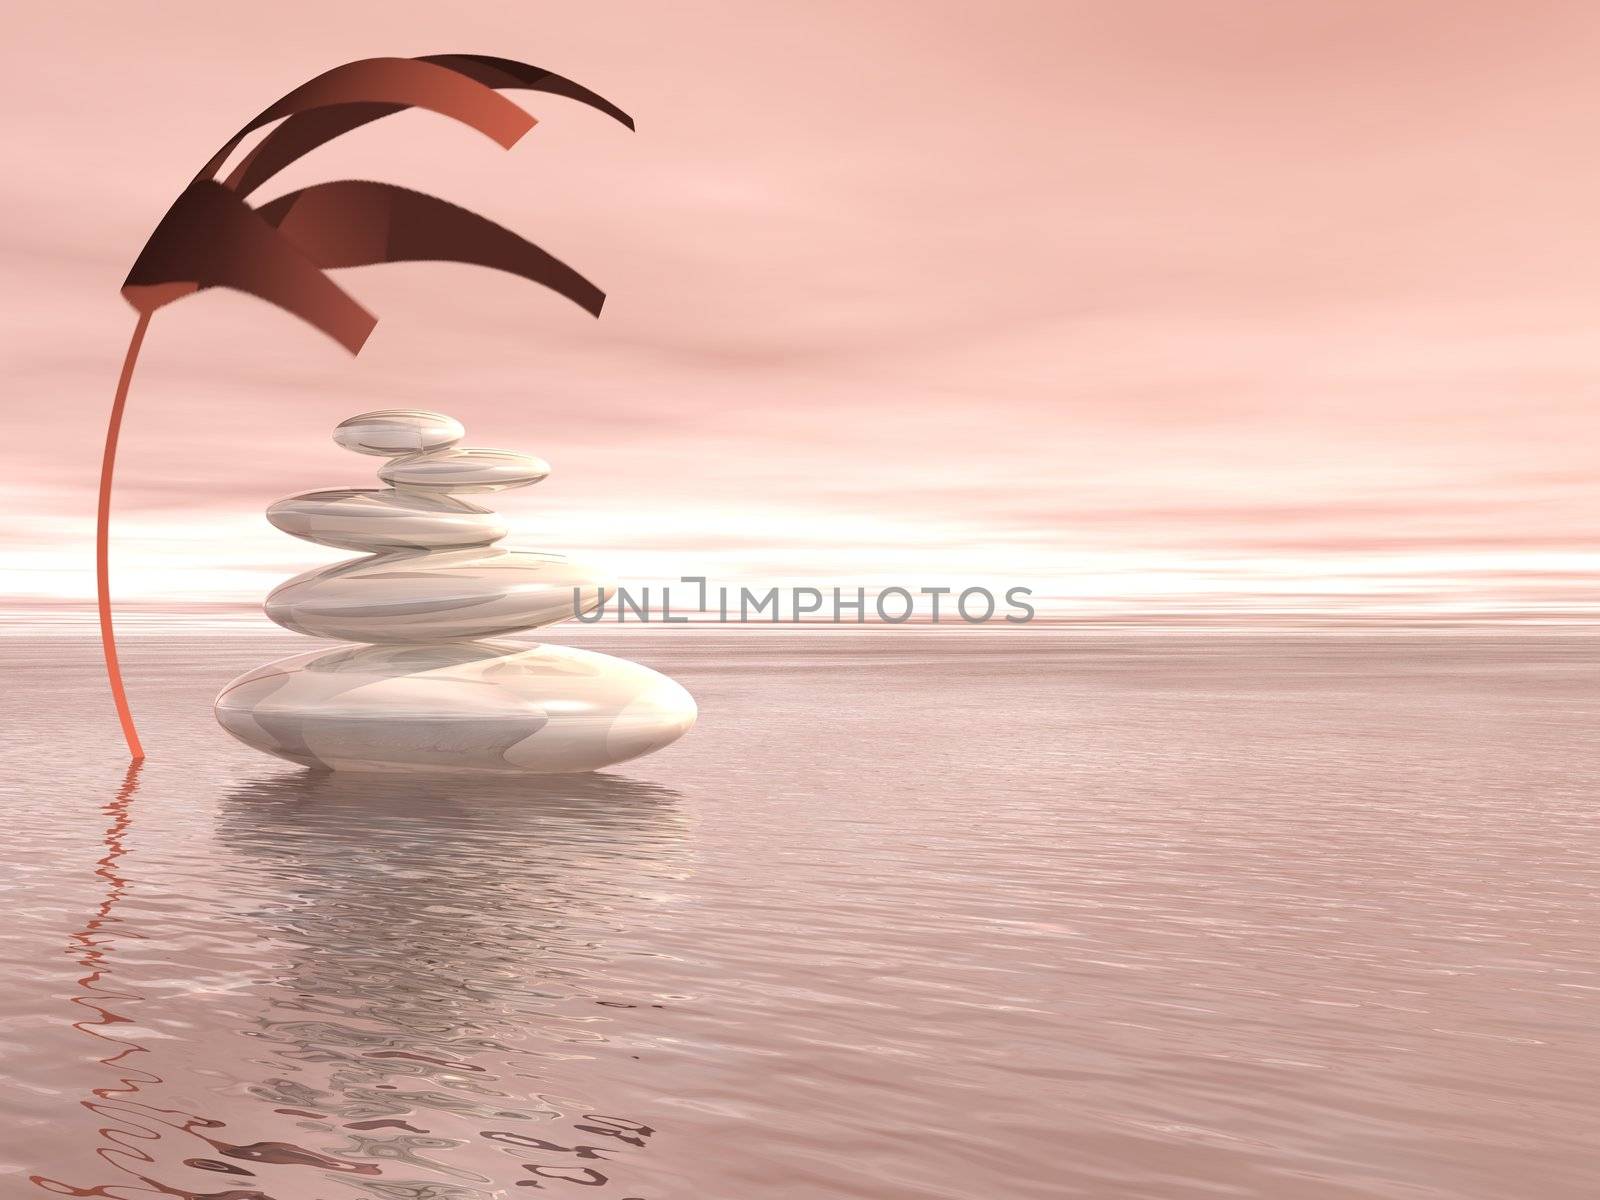 Balanced white stones upon the ocean and under a covering plant in a pink background